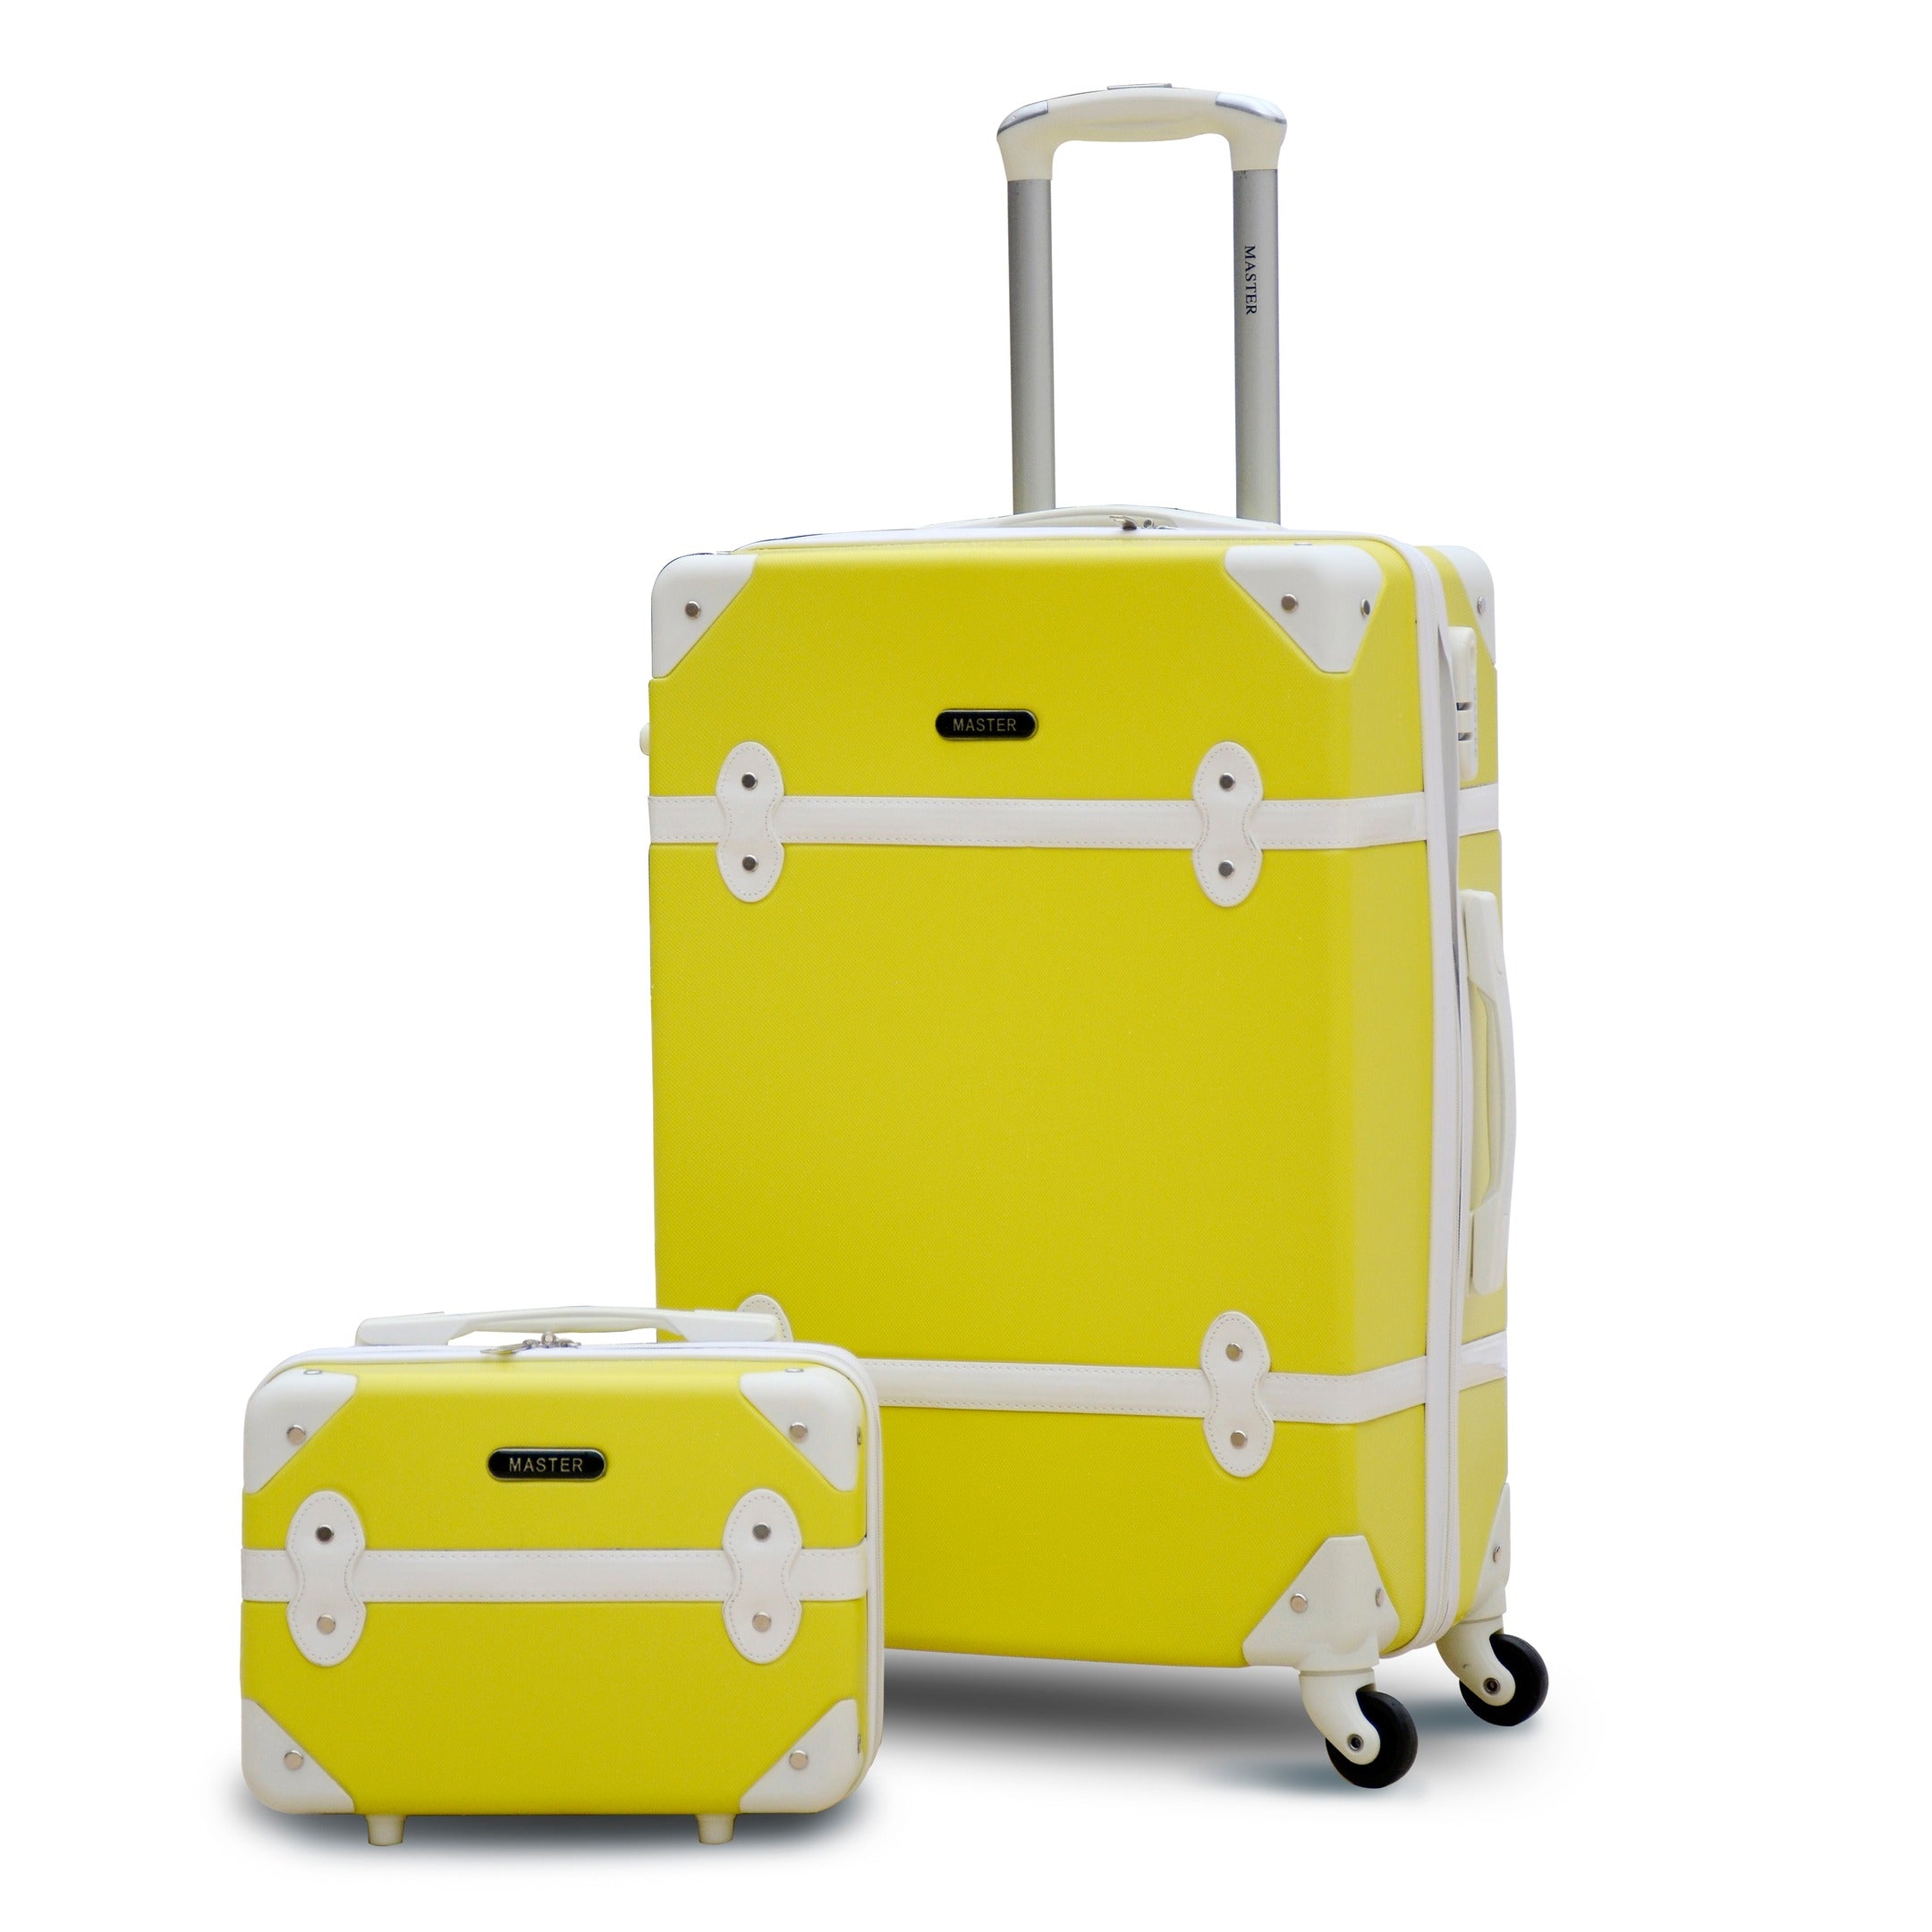 Corner Guard Yellow Lightweight ABS 20 Kg Luggage Bag + Beauty Case